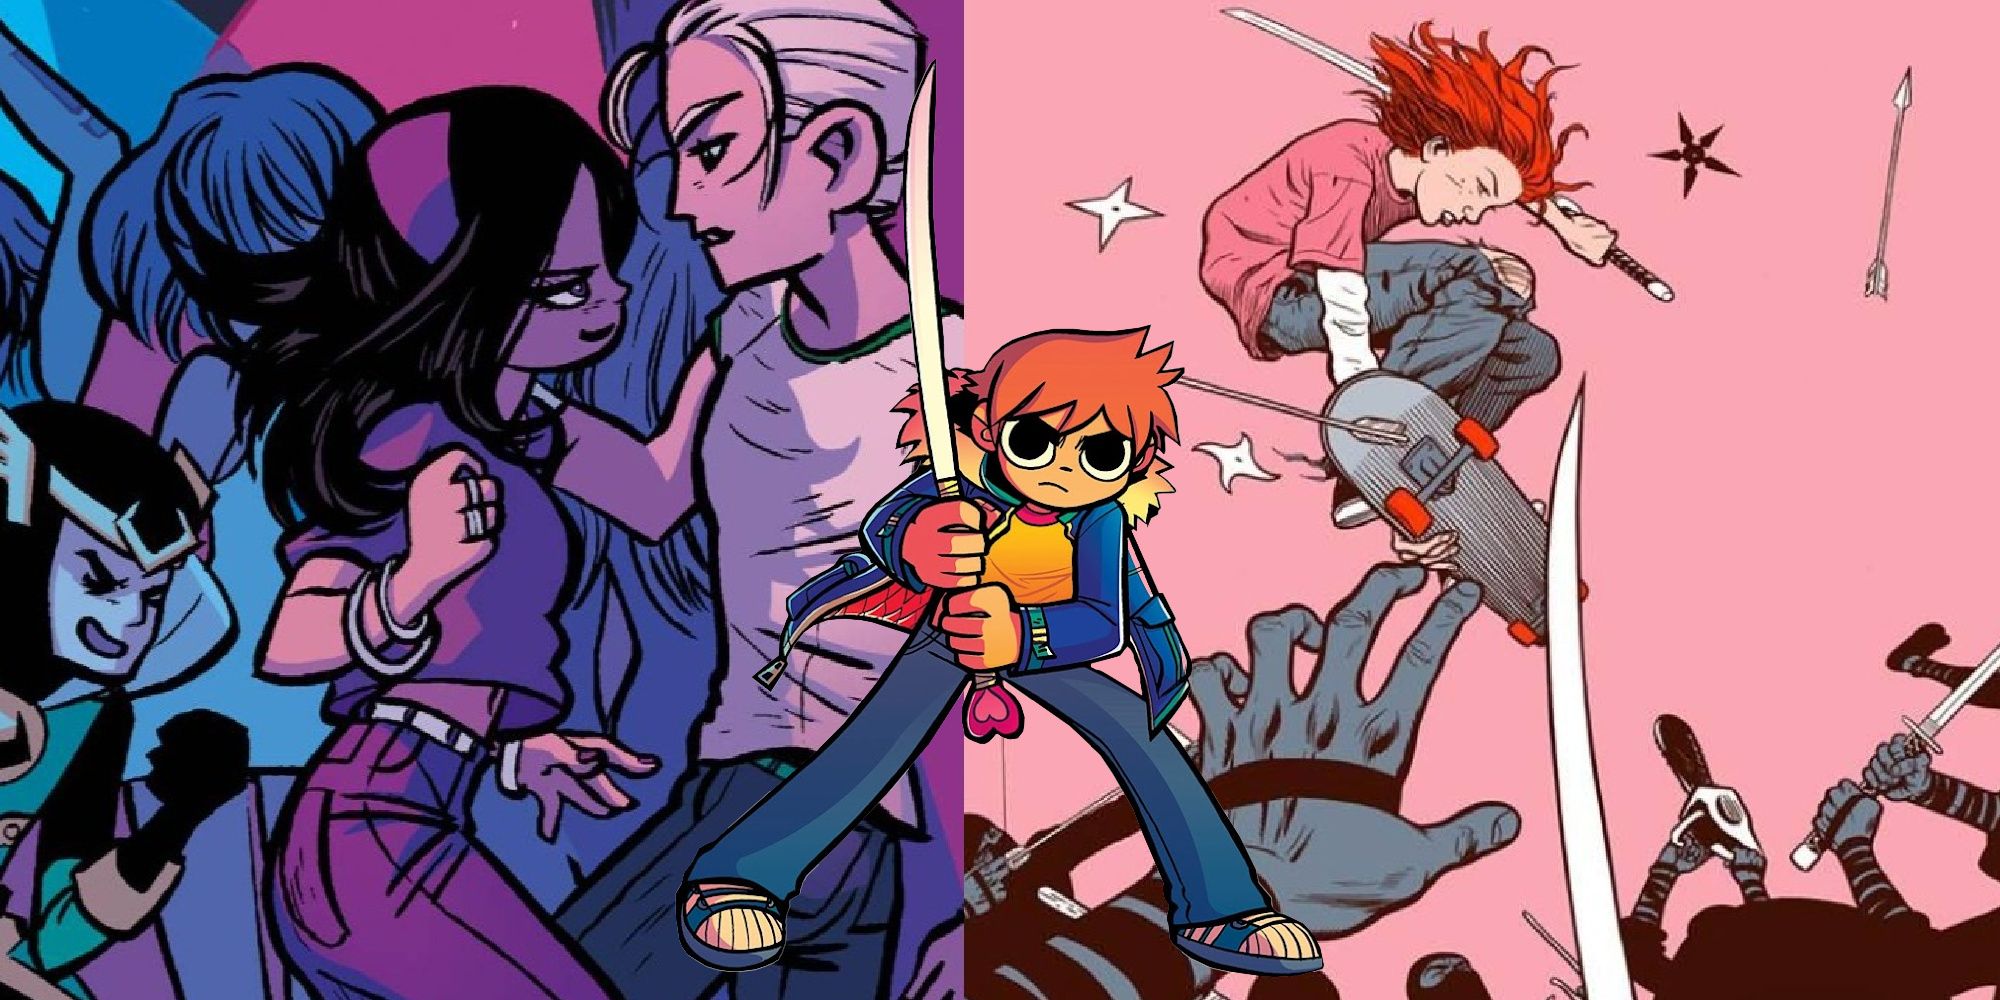 Why Science SARU's Scott Pilgrim Anime Could Be a Major Hit